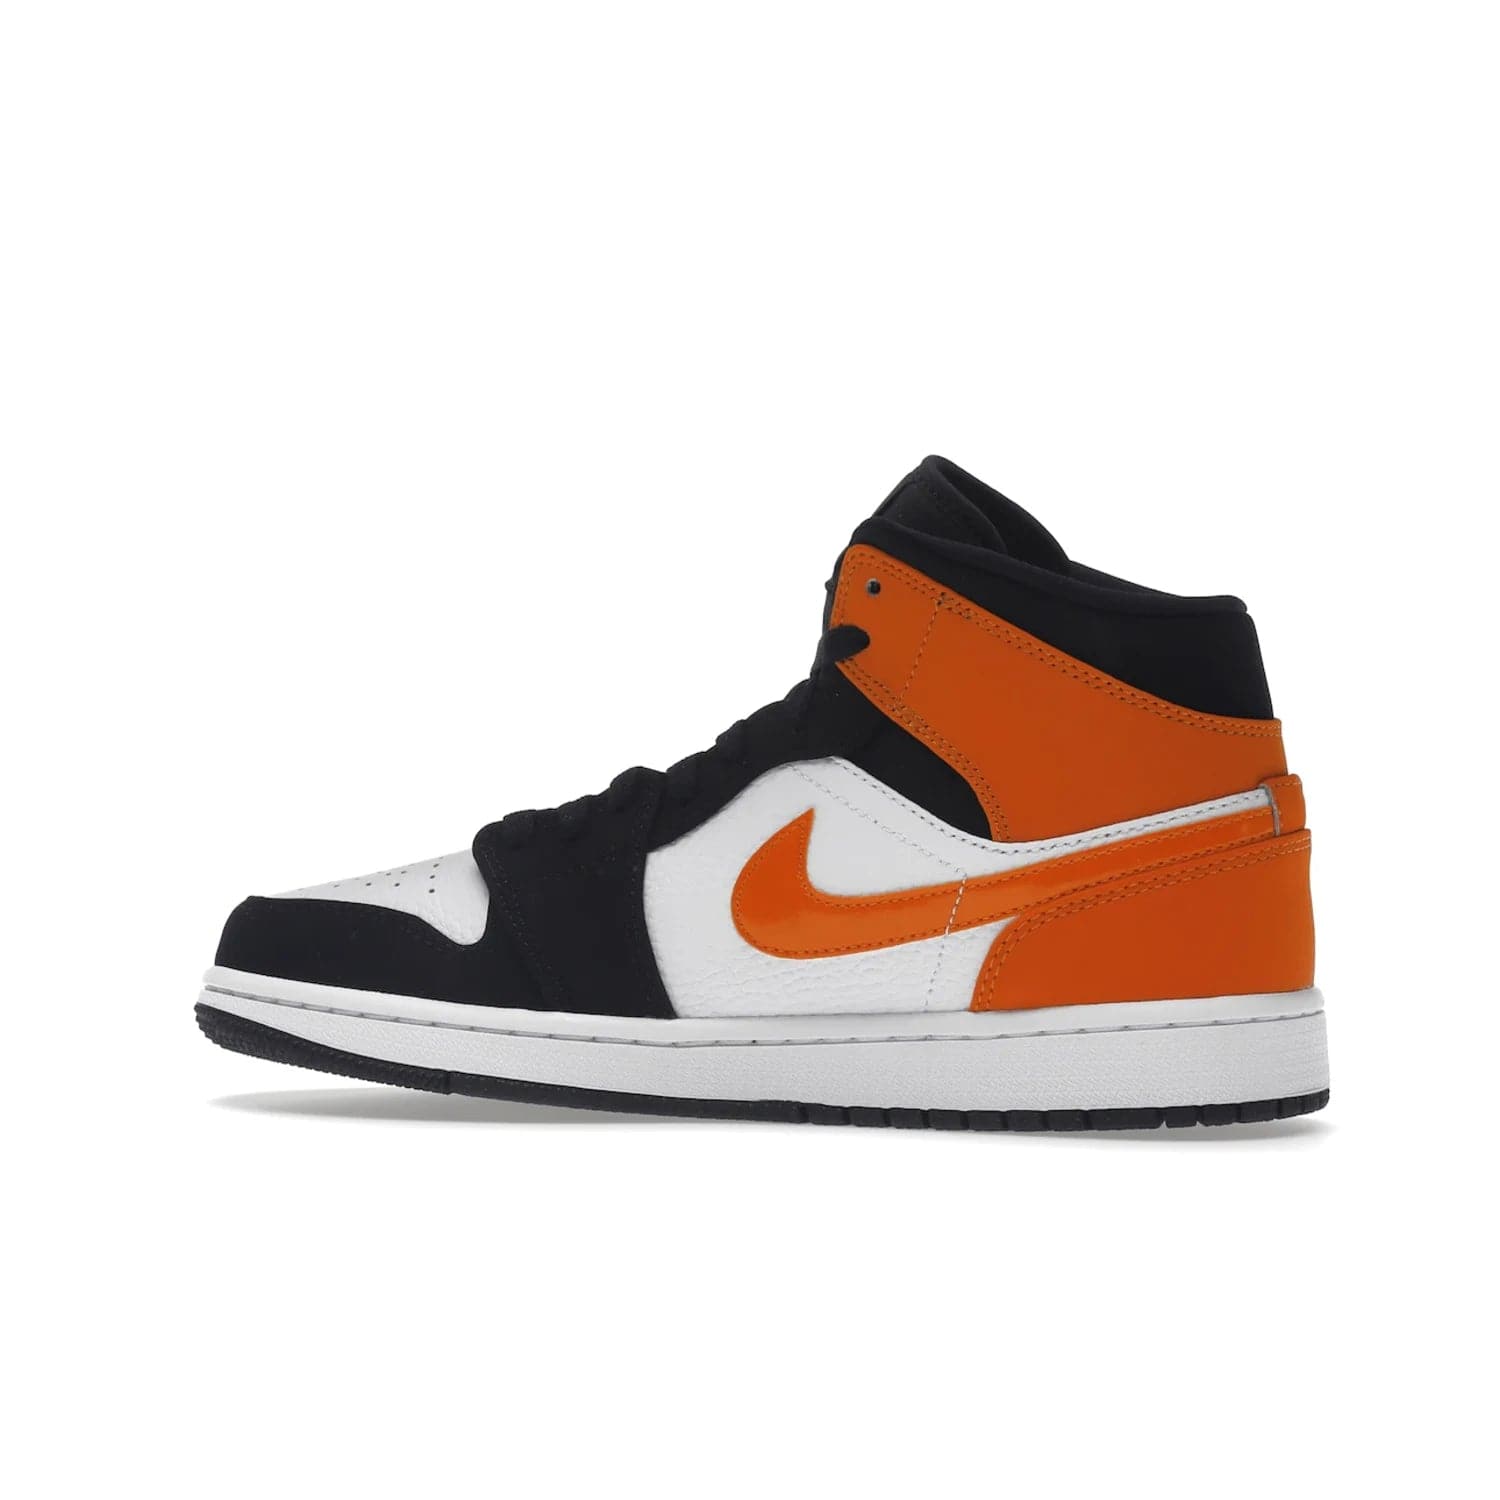 Jordan 1 Mid Shattered Backboard - Image 21 - Only at www.BallersClubKickz.com - The Air Jordan 1 Mid Shattered Backboard offers a timeless Black/White-Starfish colorway. Classic Swoosh logo and AJ insignia plus a shatterd backboard graphic on the insole. Get your pair today!